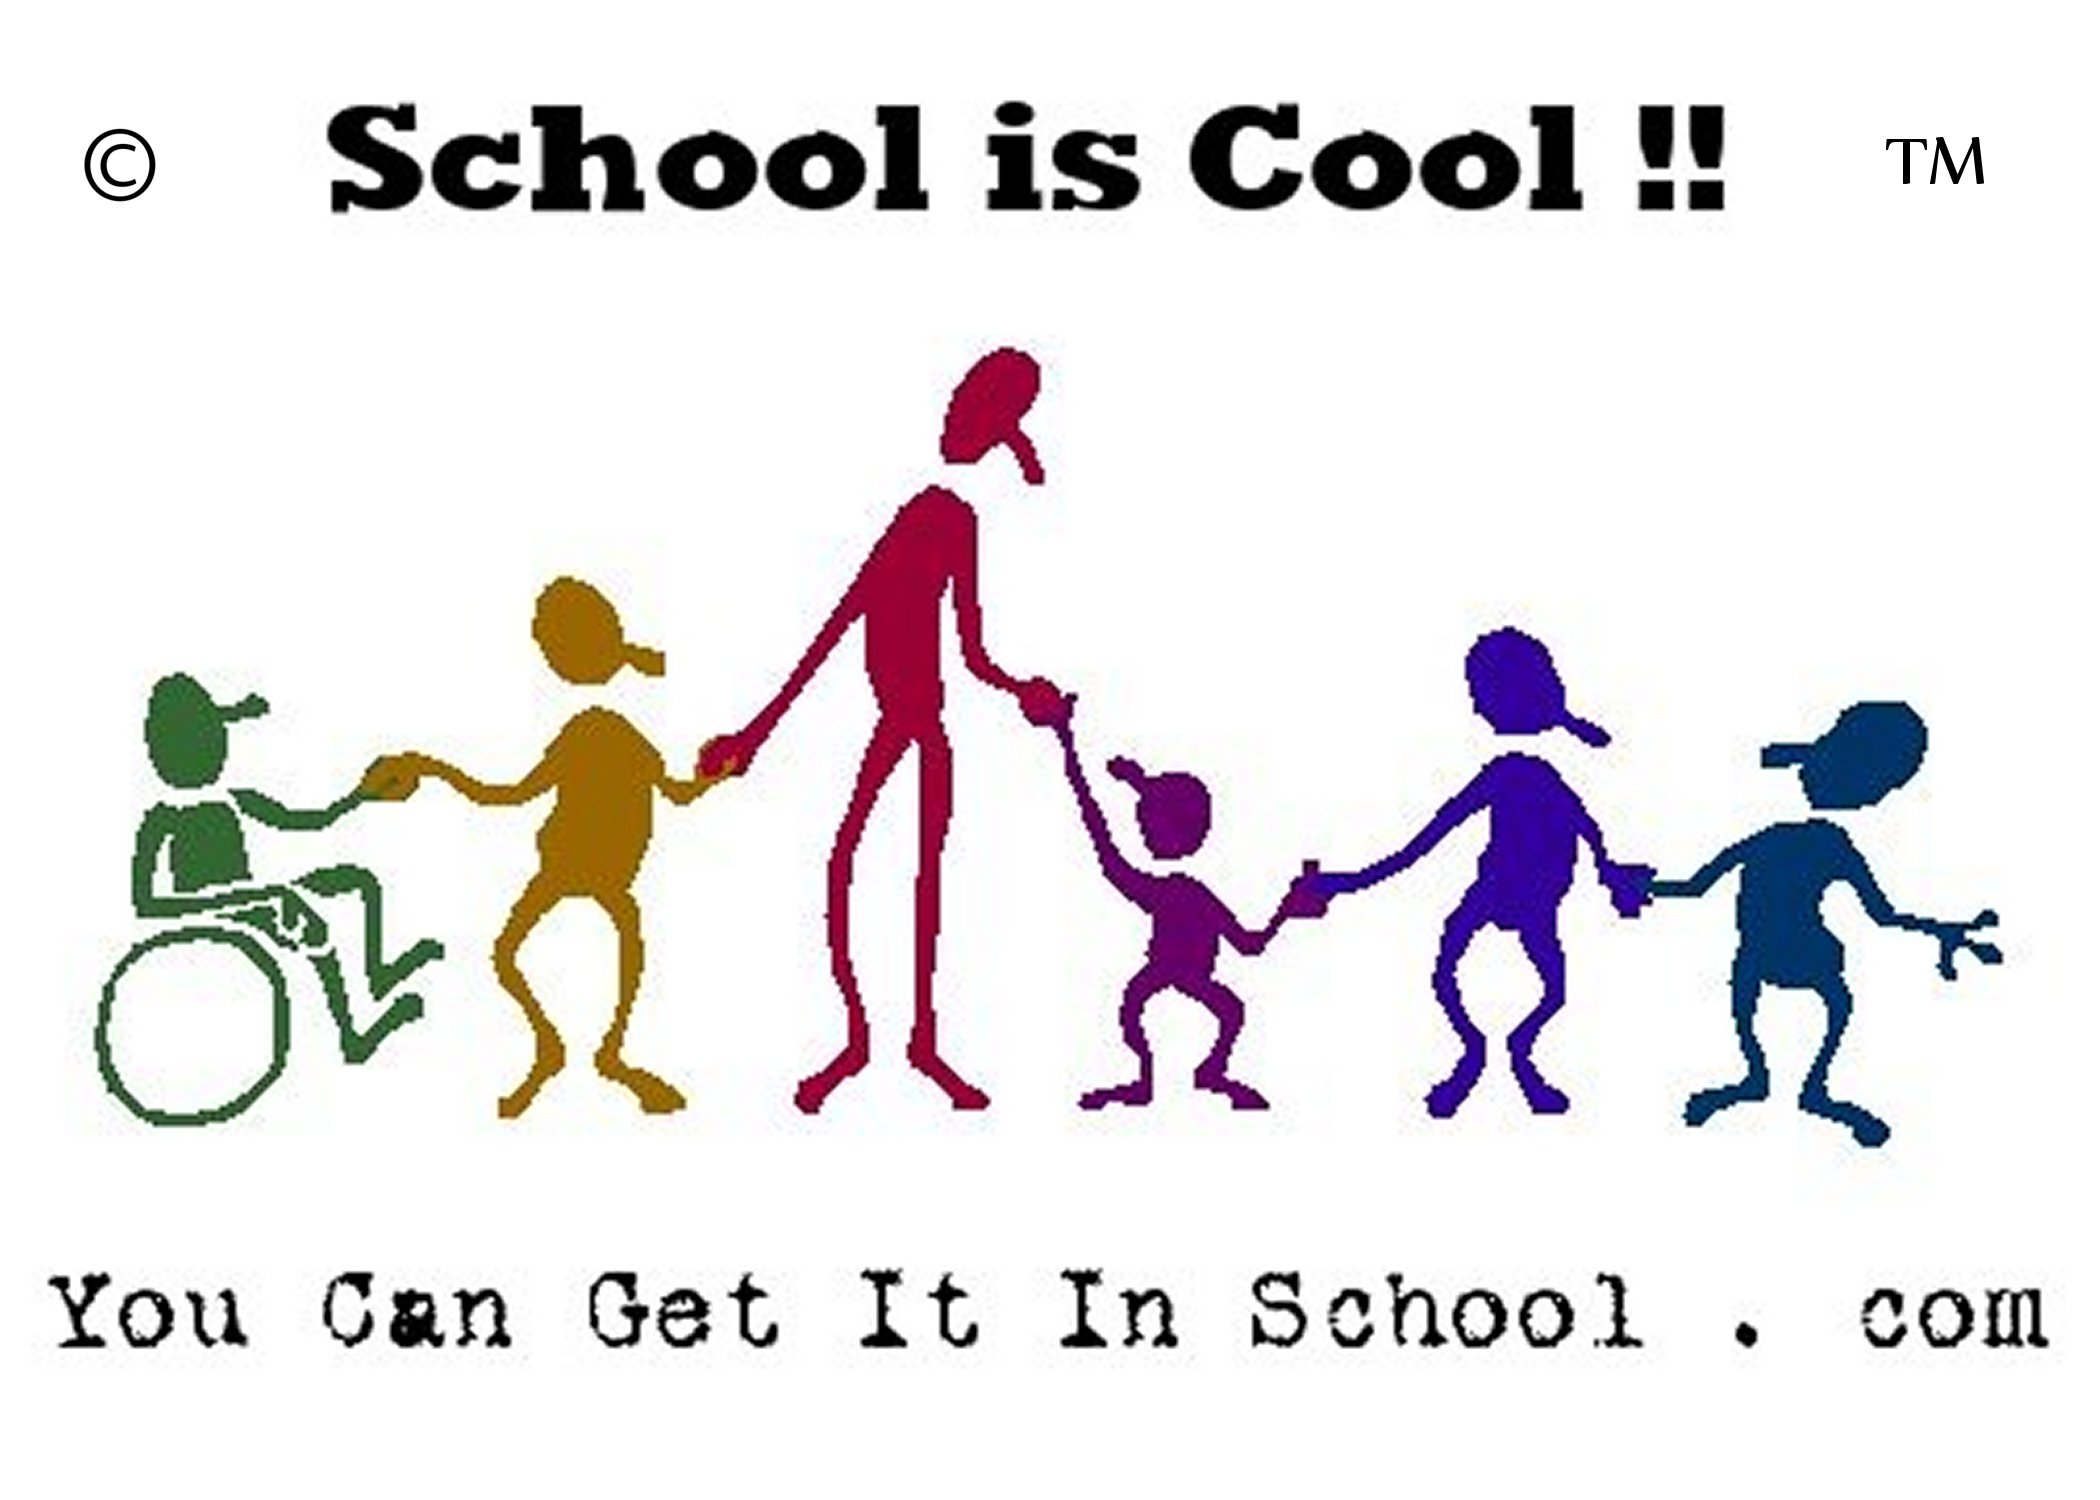 School is Cool Campaign